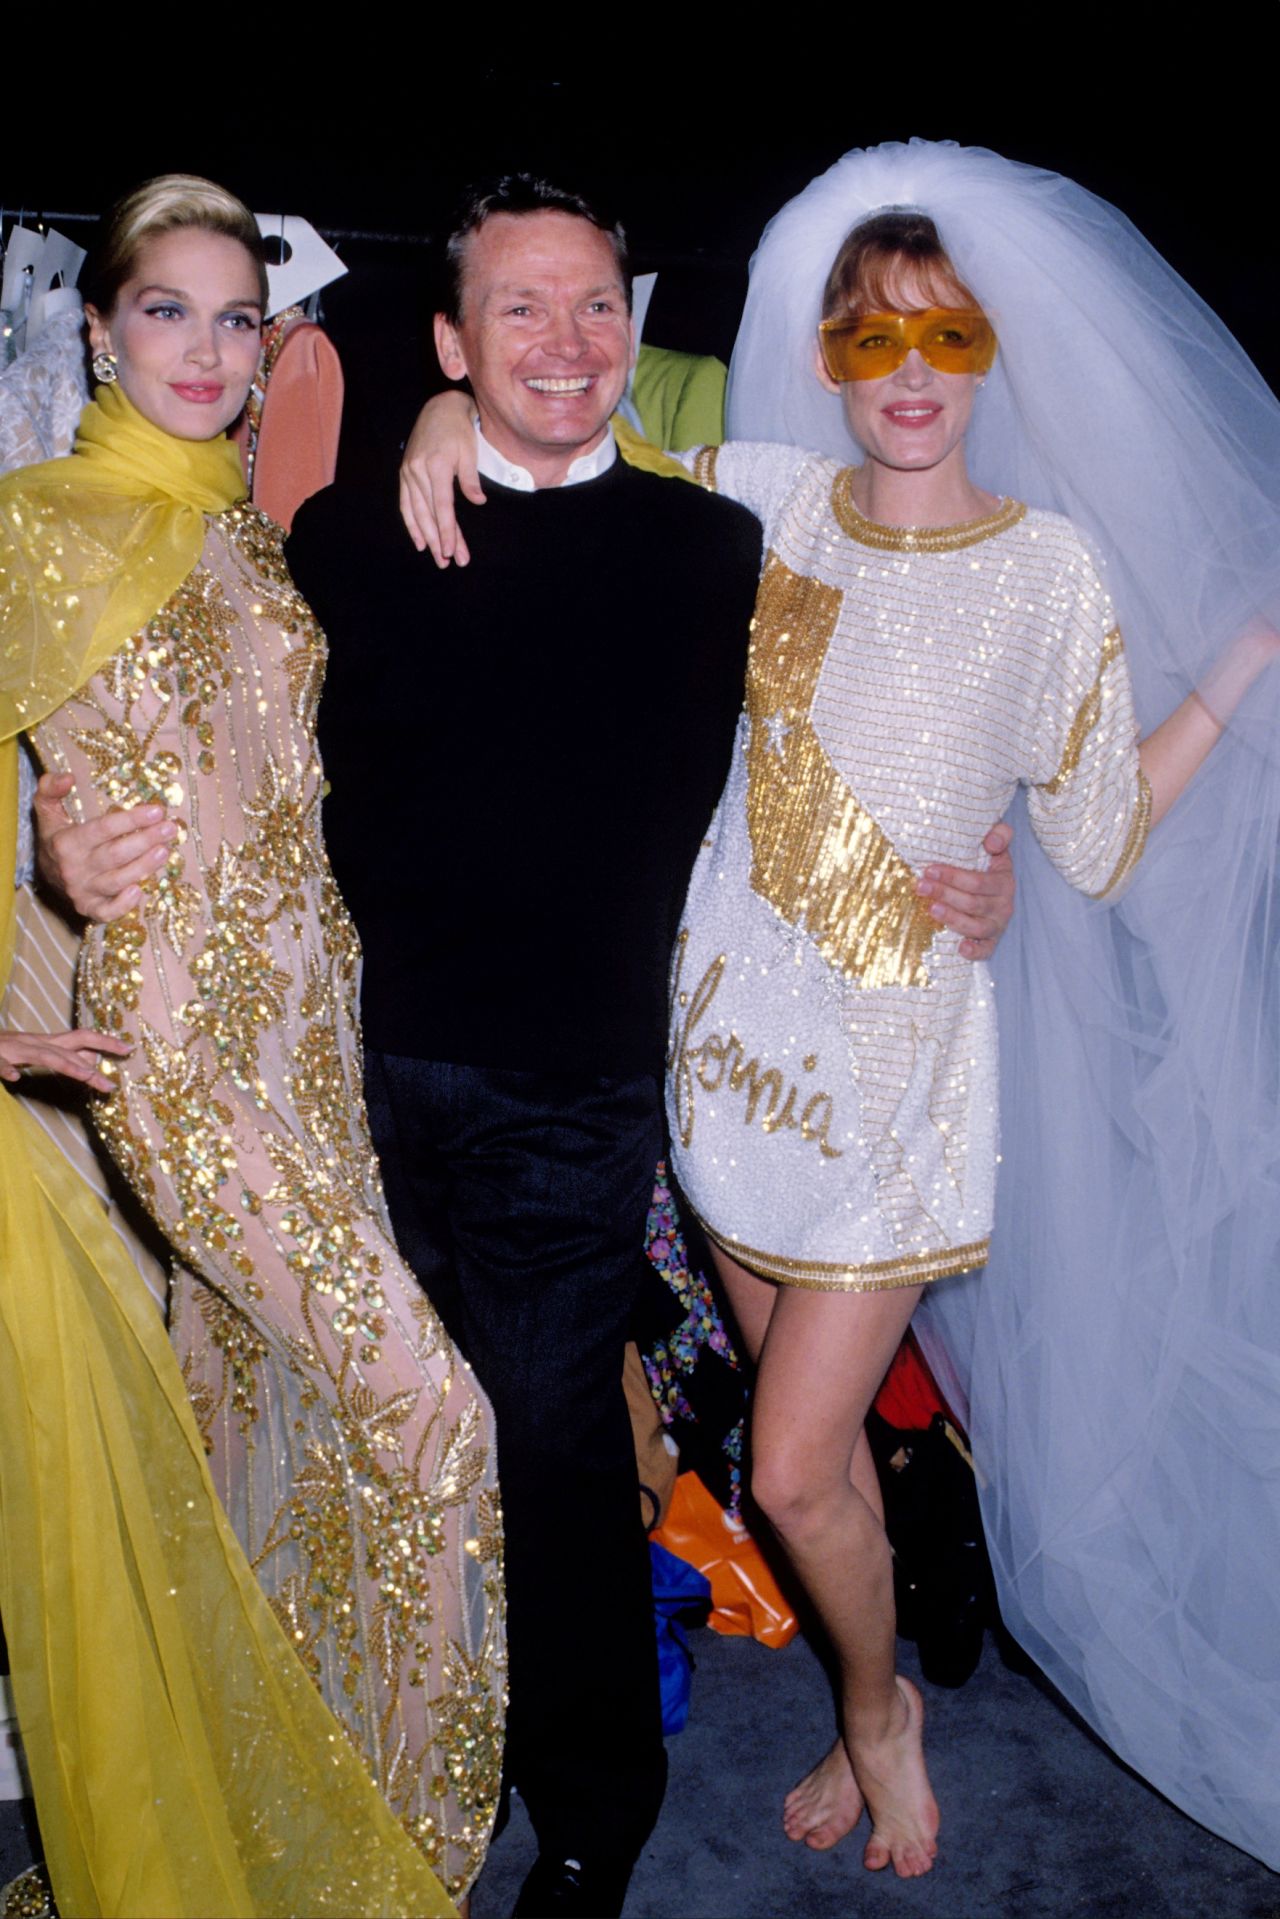 Bob Mackie poses with models during New York Fashion Week in the late 1980s.